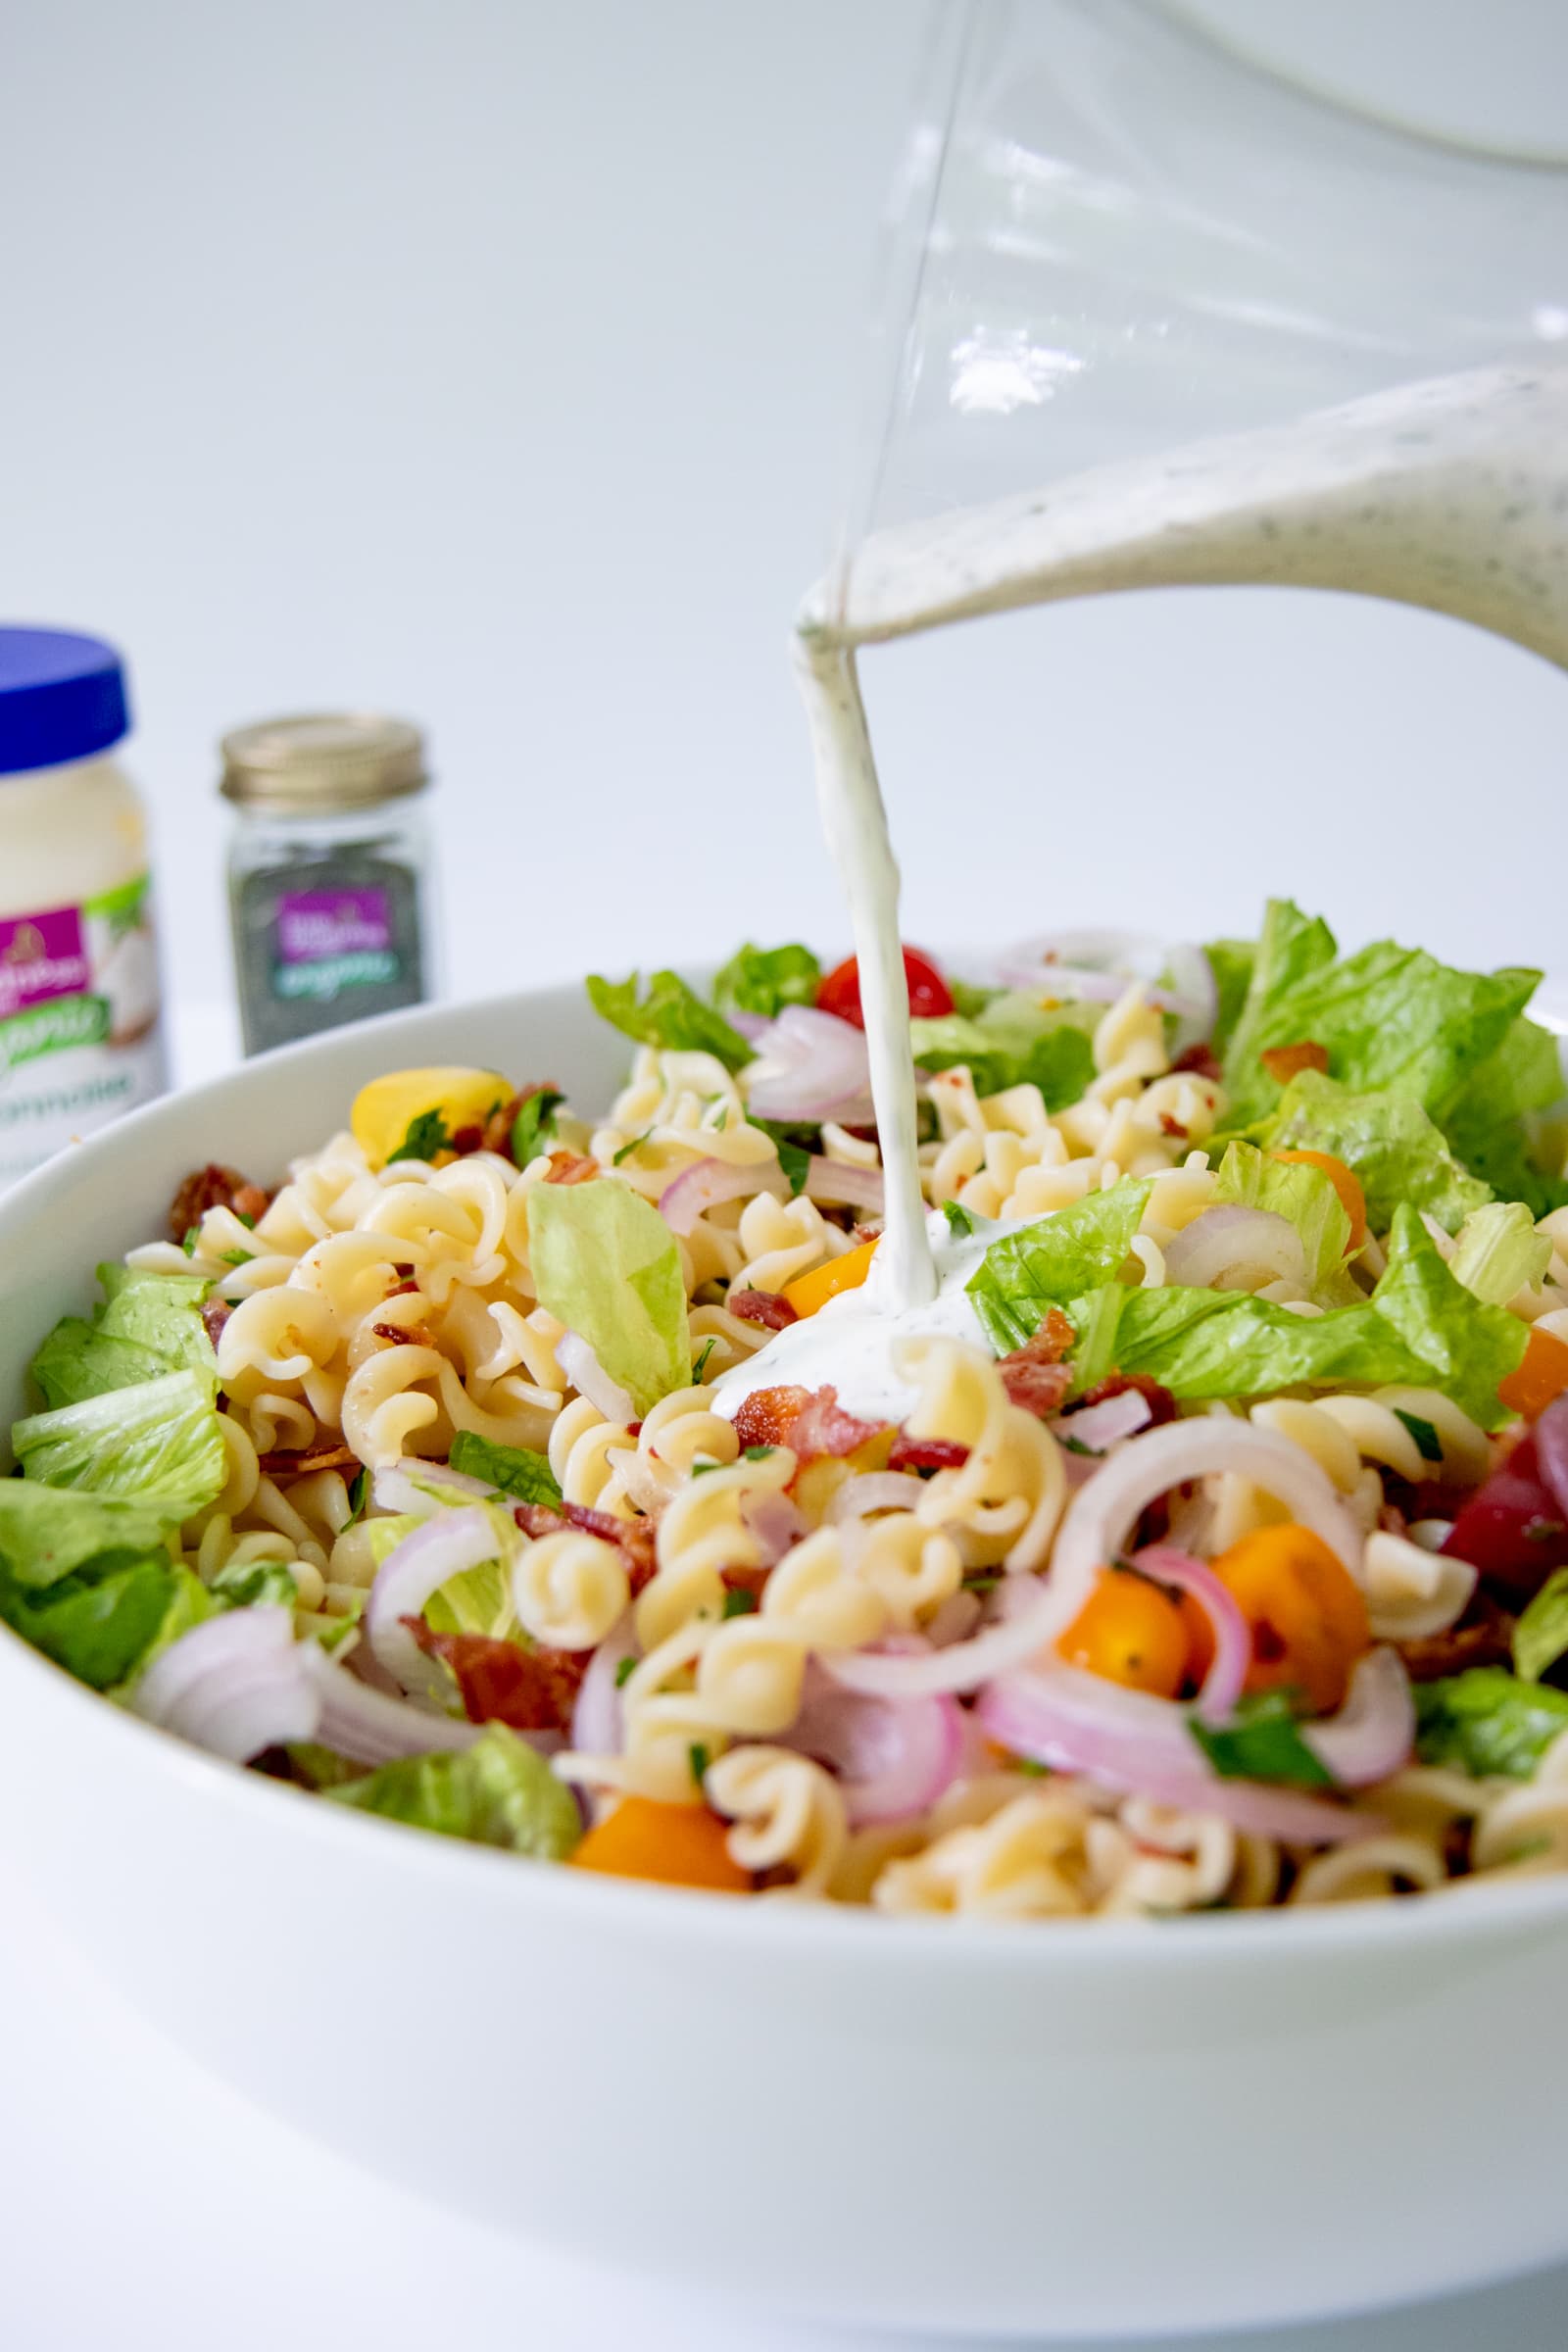 Homemade ranch dressing being poured over a pasta salad